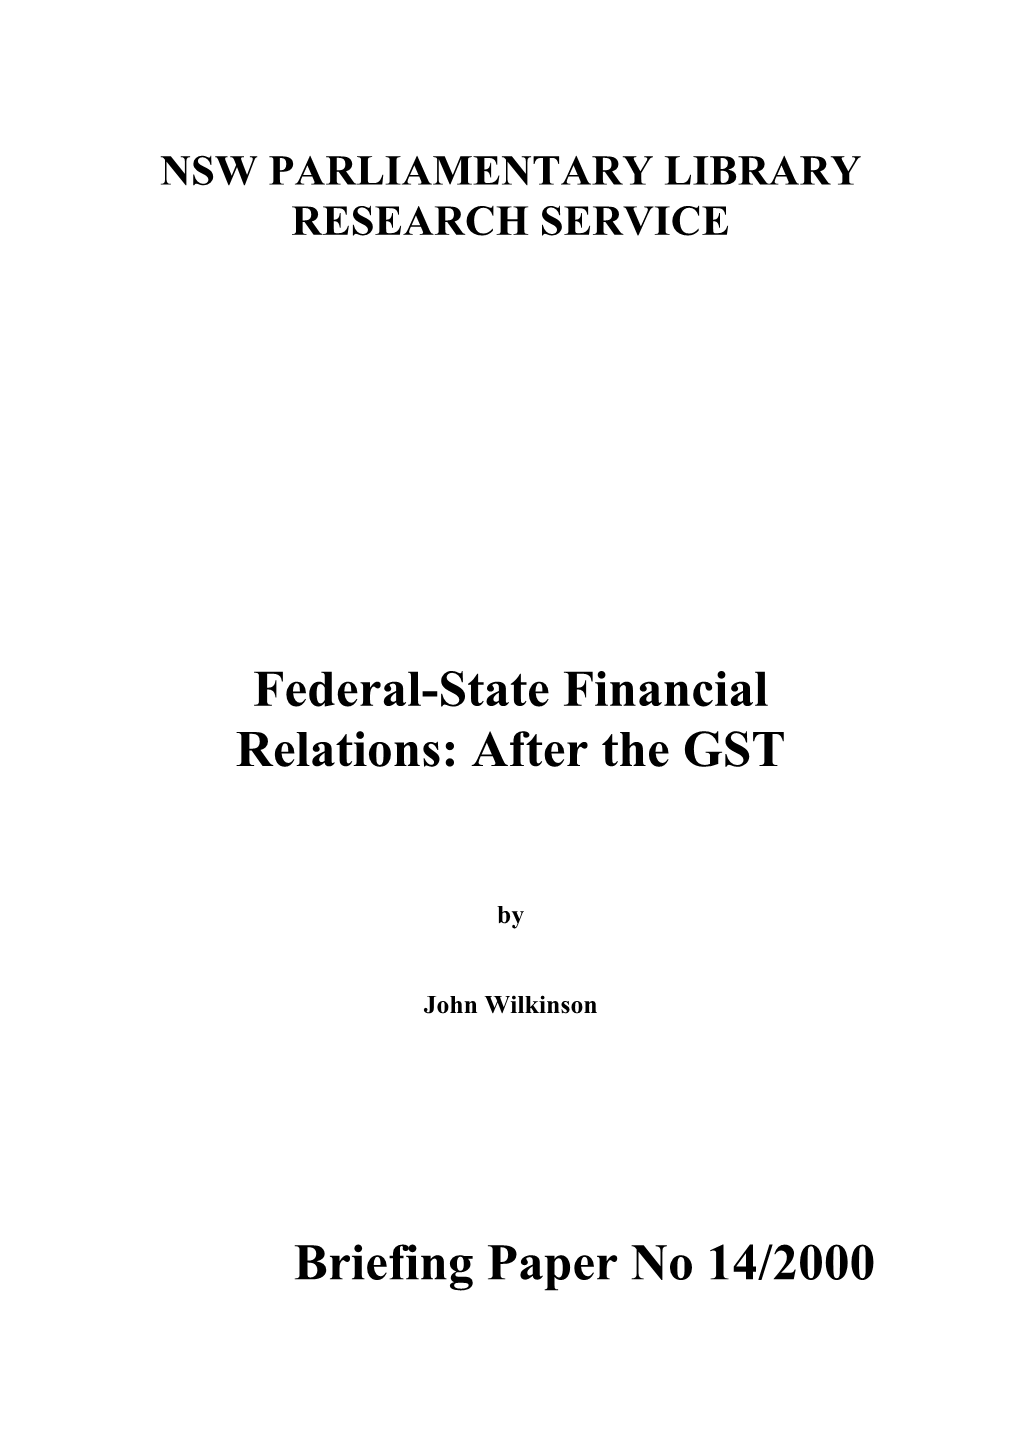 Federal-State Financial Relations: After the GST